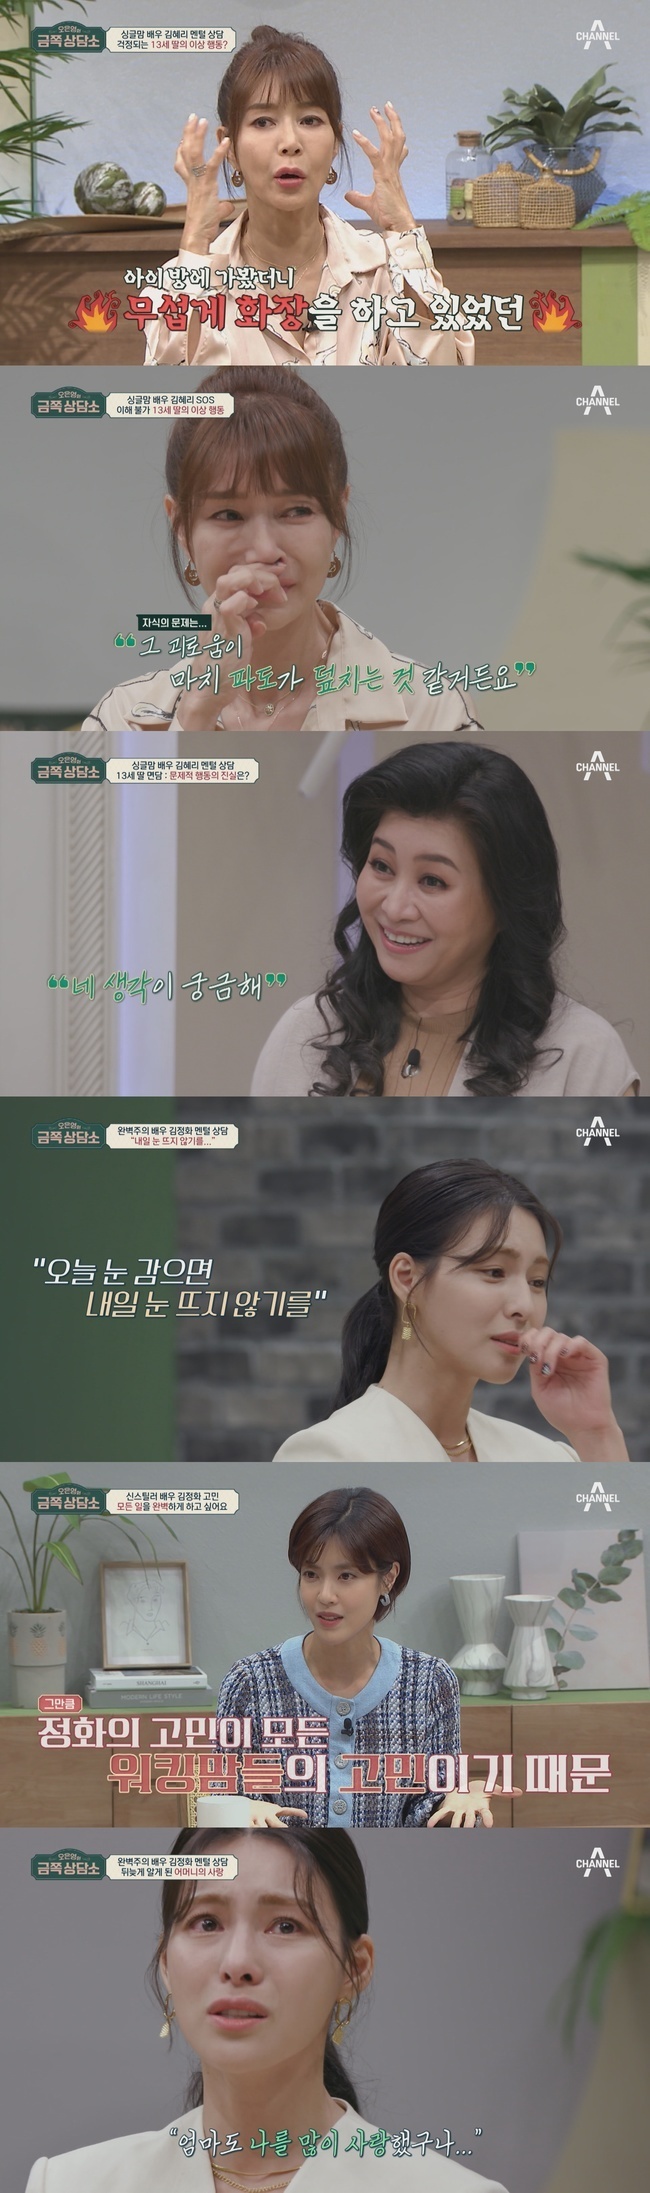 Single mom Actor Hye-ri Kim, who raises her 13-year-old daughter, talks about mother-daughter conflictTwo new SteelSeriesler Actor Hye-ri Kim and Kim Jung-hwa who captured the CRT at Channel A Oh Eun-youngs Gold Counseling Center broadcast on November 19 will be revealed.The first customer to appear first was Actor Hye-ri Kim, who made his debut in 1988 as Miss Korea, and showed a thick performance across historical dramas and contemporary dramas.After the 2014 divorce, she continues her career as a dignified single mom, and she listens to the reason why she applied for an emergency SOS at the Gold Counseling Center.Hye-ri Kim, who said she was desperate enough to come one step from Jeju Island, burst into tears, saying, The conflict with her adolescent daughter is too severe two to three years ago, telling her that her 13-year-old daughter is so hard every day.Whenever I saw the actions of my daughter who could not understand and the actions that suspected separation anxiety, I was gradually angry and surprised everyone by Confessions that I had said that I should not put it in my mouth.Oh Eun Young Doctorate, who listened to the story, said, In order to understand the cause of the problem properly, we should listen to the story of someone who disagrees with Mr. Hye-ri Kim. Since the opening of the counseling center, we have invited our daughter, who is the subject of conflict, to continue coaching for mother and daughter directly.It is noteworthy that the truth of the mother-daughter conflict analyzed by Oh Doctorate and the key to the reversal revealed in the process will be over and the mother and daughter will be able to reconcile after a long cross.The following customer was Actor Kim Jung-hwa, who was divided from a high-teen star to a new SteelSeries in the 2000s.Kim Jung-hwa, who surprised everyone with the reverse spec that she was the mother of two children in the ninth year of marriage, said that there was a reason to visit the Gold Counselor rather than my young like gold.He tells the story of his debut at the age of 18 and having to jump into a harsh livelihood, and the slump he had during his prime, and he still worries that he should do his part well.Oh Eun Young Doctorate looks for such a heartfelt cause in Kim Jung-hwas long wound.He also said that he was saddened by the pain with his parents in his childhood, who had not talked about it anywhere, and the quickness of his long cancer battle with Mother.Oh Eun Youngs Special Magic for Kim Jung-hwa, who will comfort the past days of living as a filial piety and live more brightly in the future, raises questions.